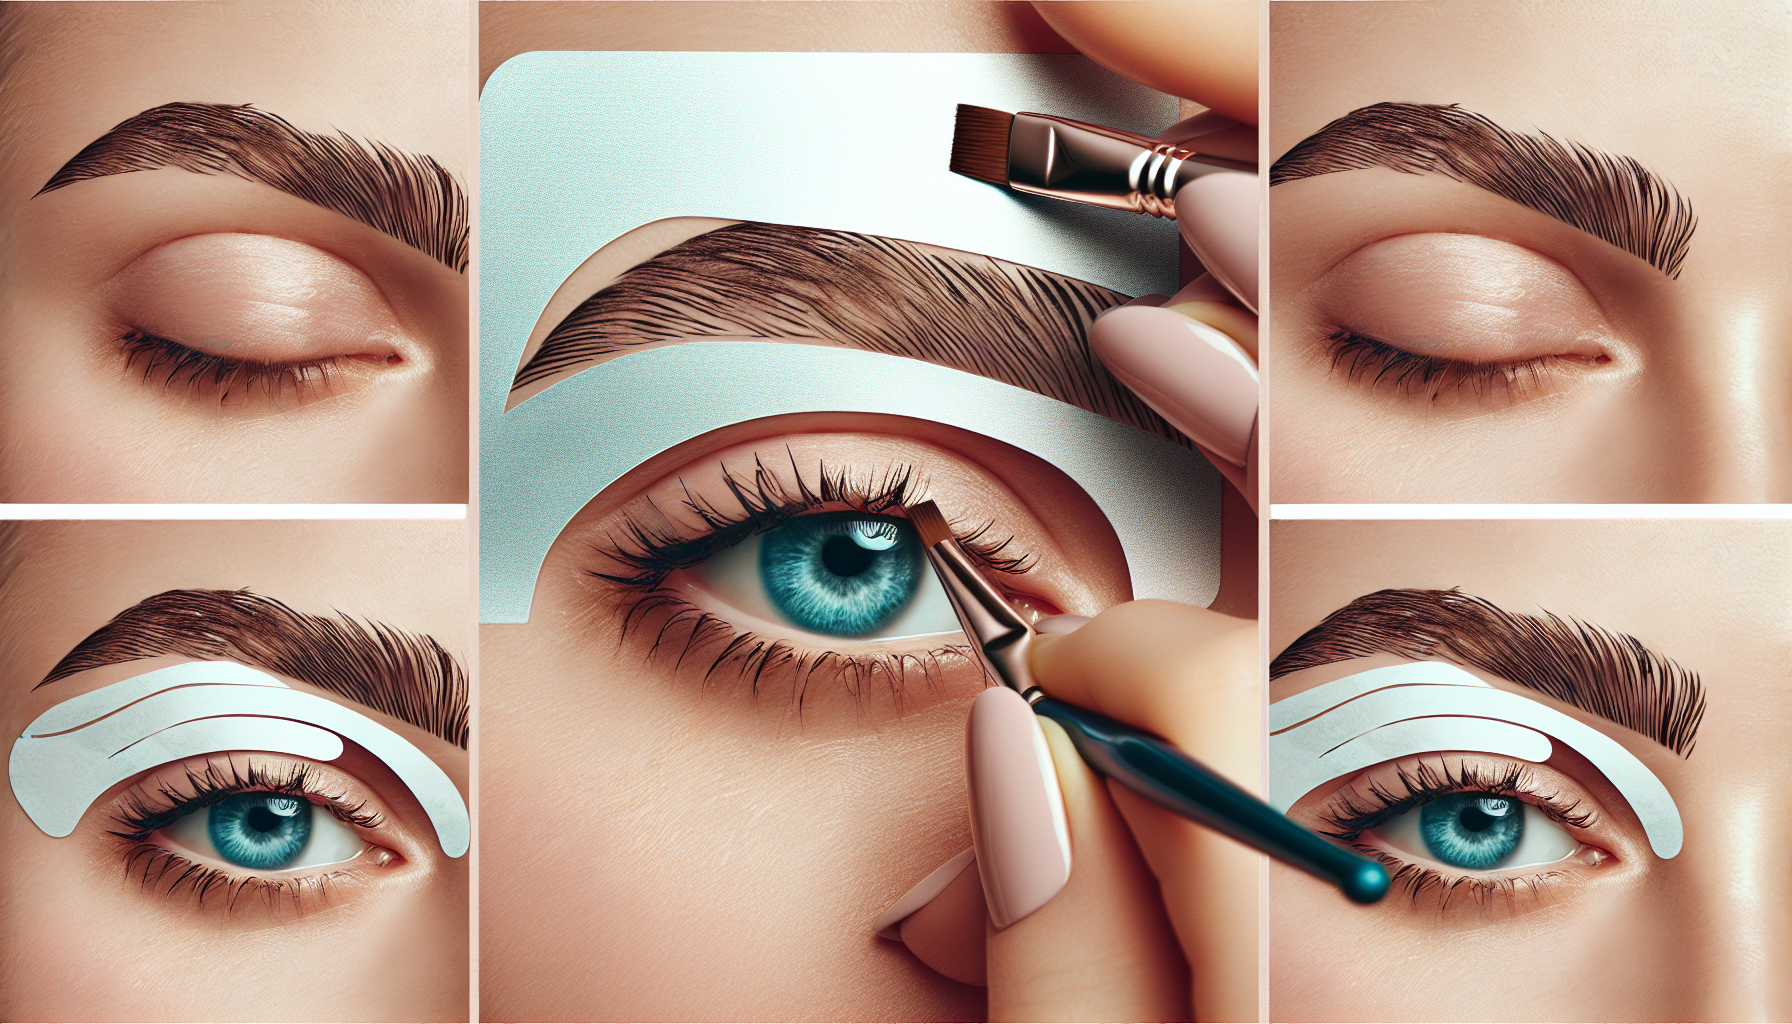 Step-by-step guide to using eyebrow stencils